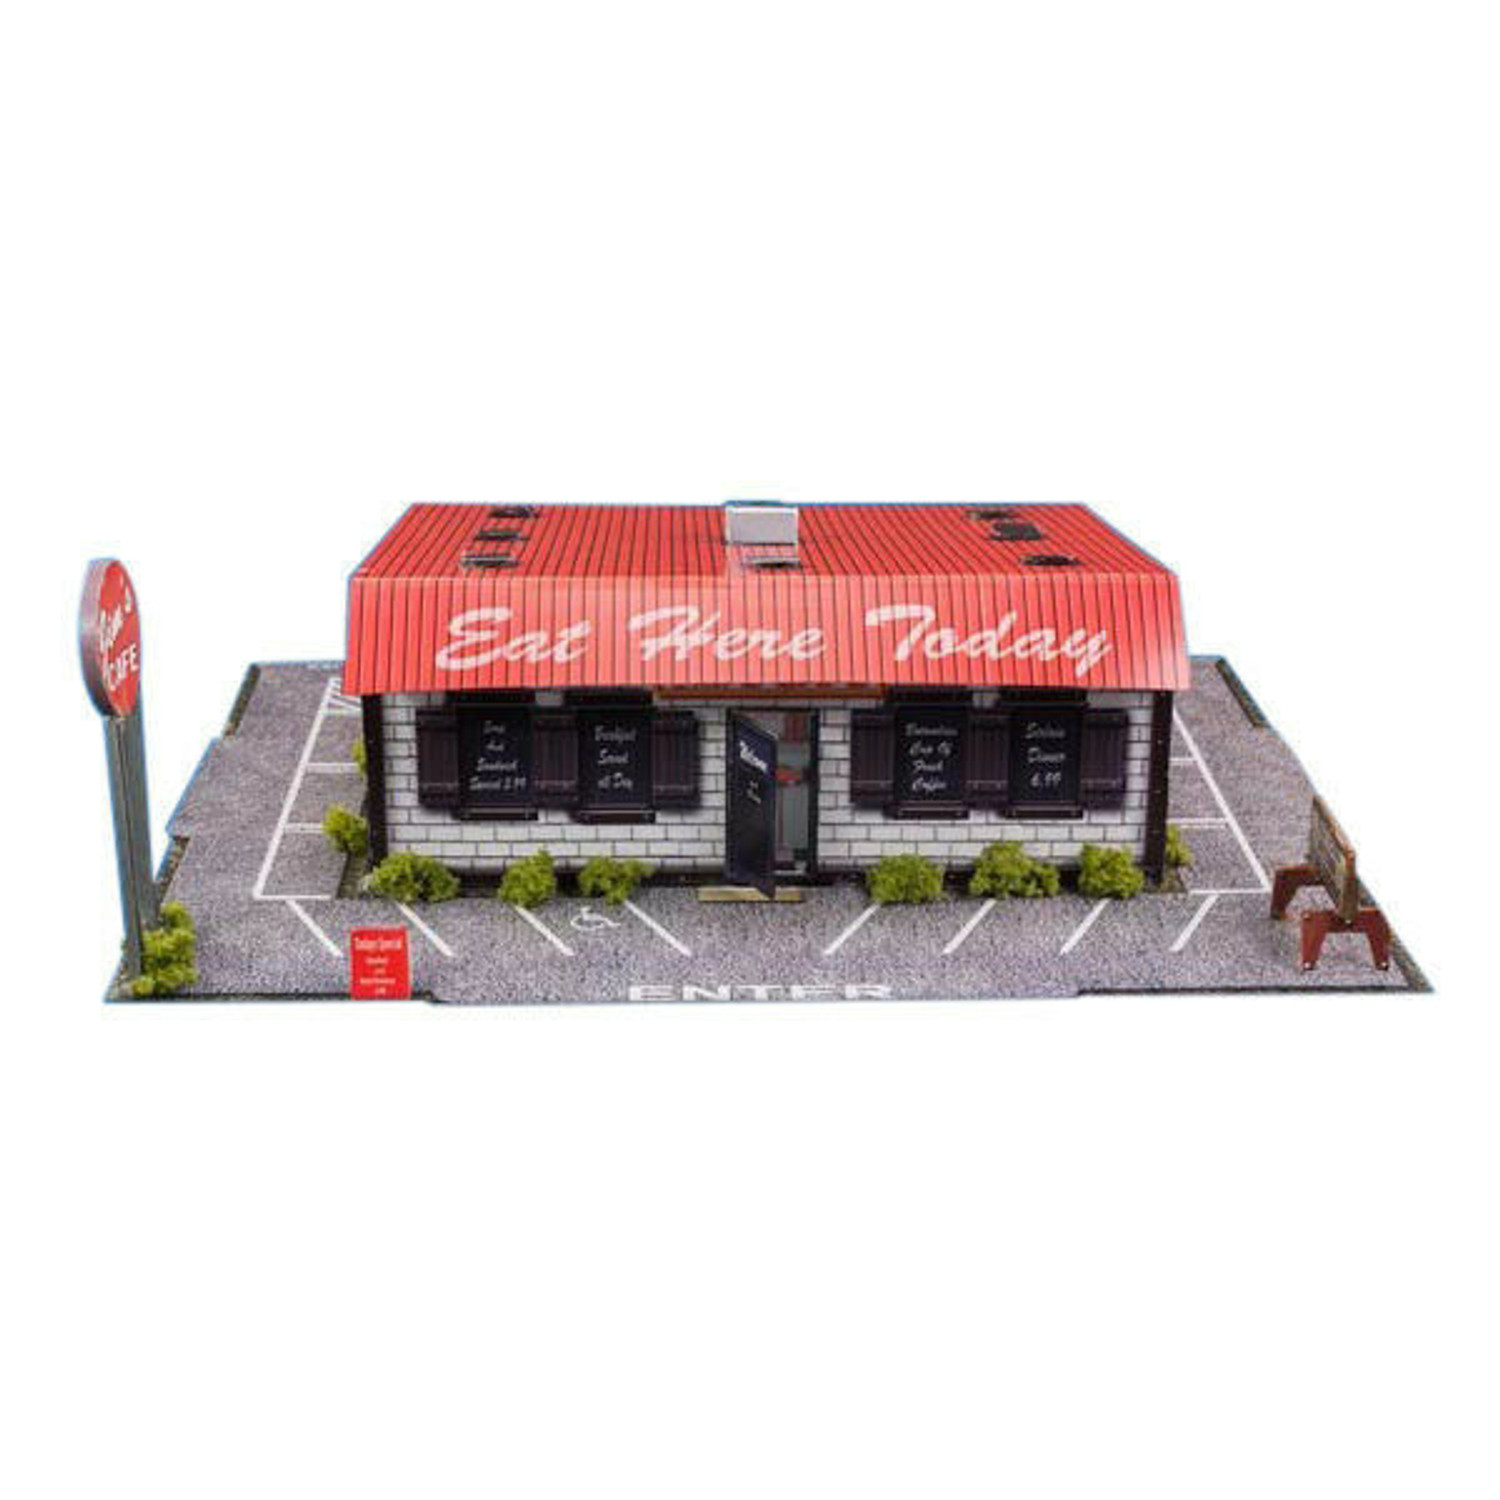 BK 6420 1:64 Scale "Diner" Photo Real Scale Building Kit